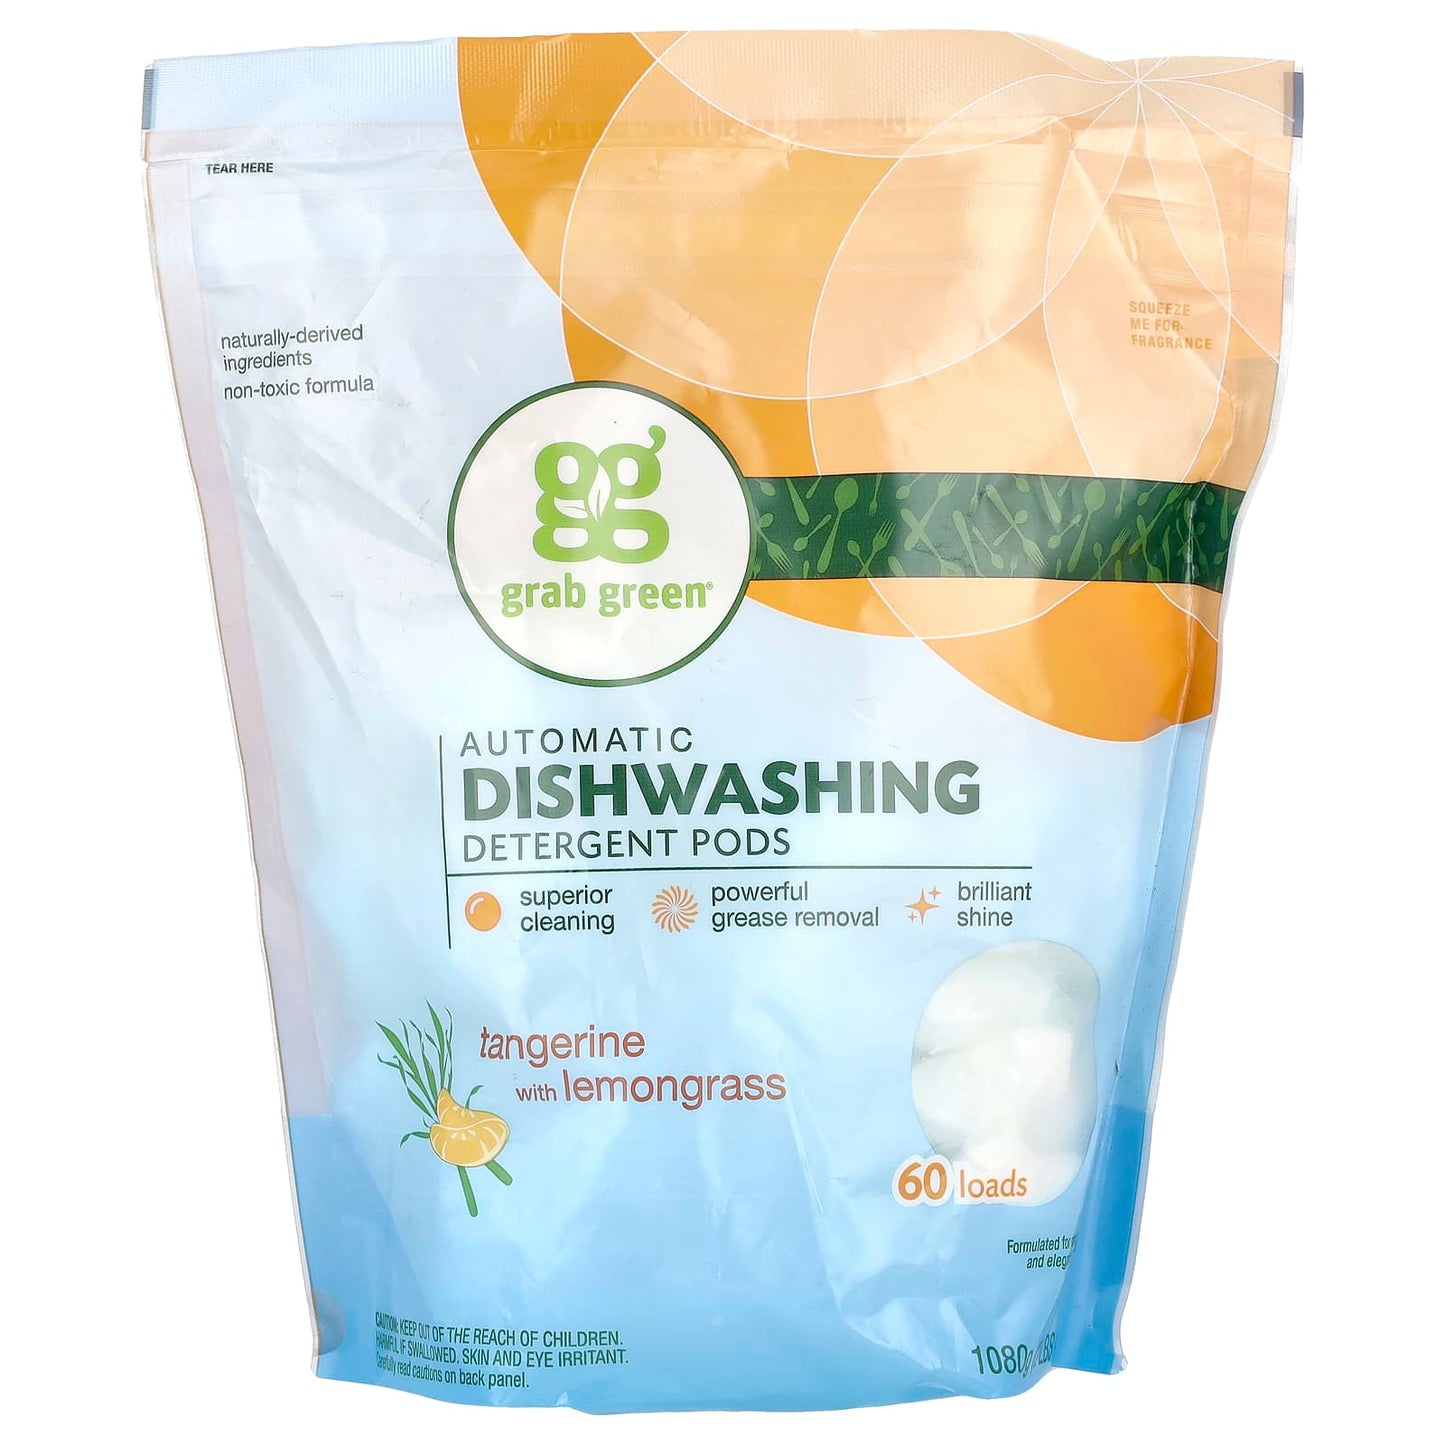 Grab Green-Automatic Dishwashing Detergent Pods-Tangerine with Lemongrass-60 Loads-2 lbs 6 oz (1,080 g)